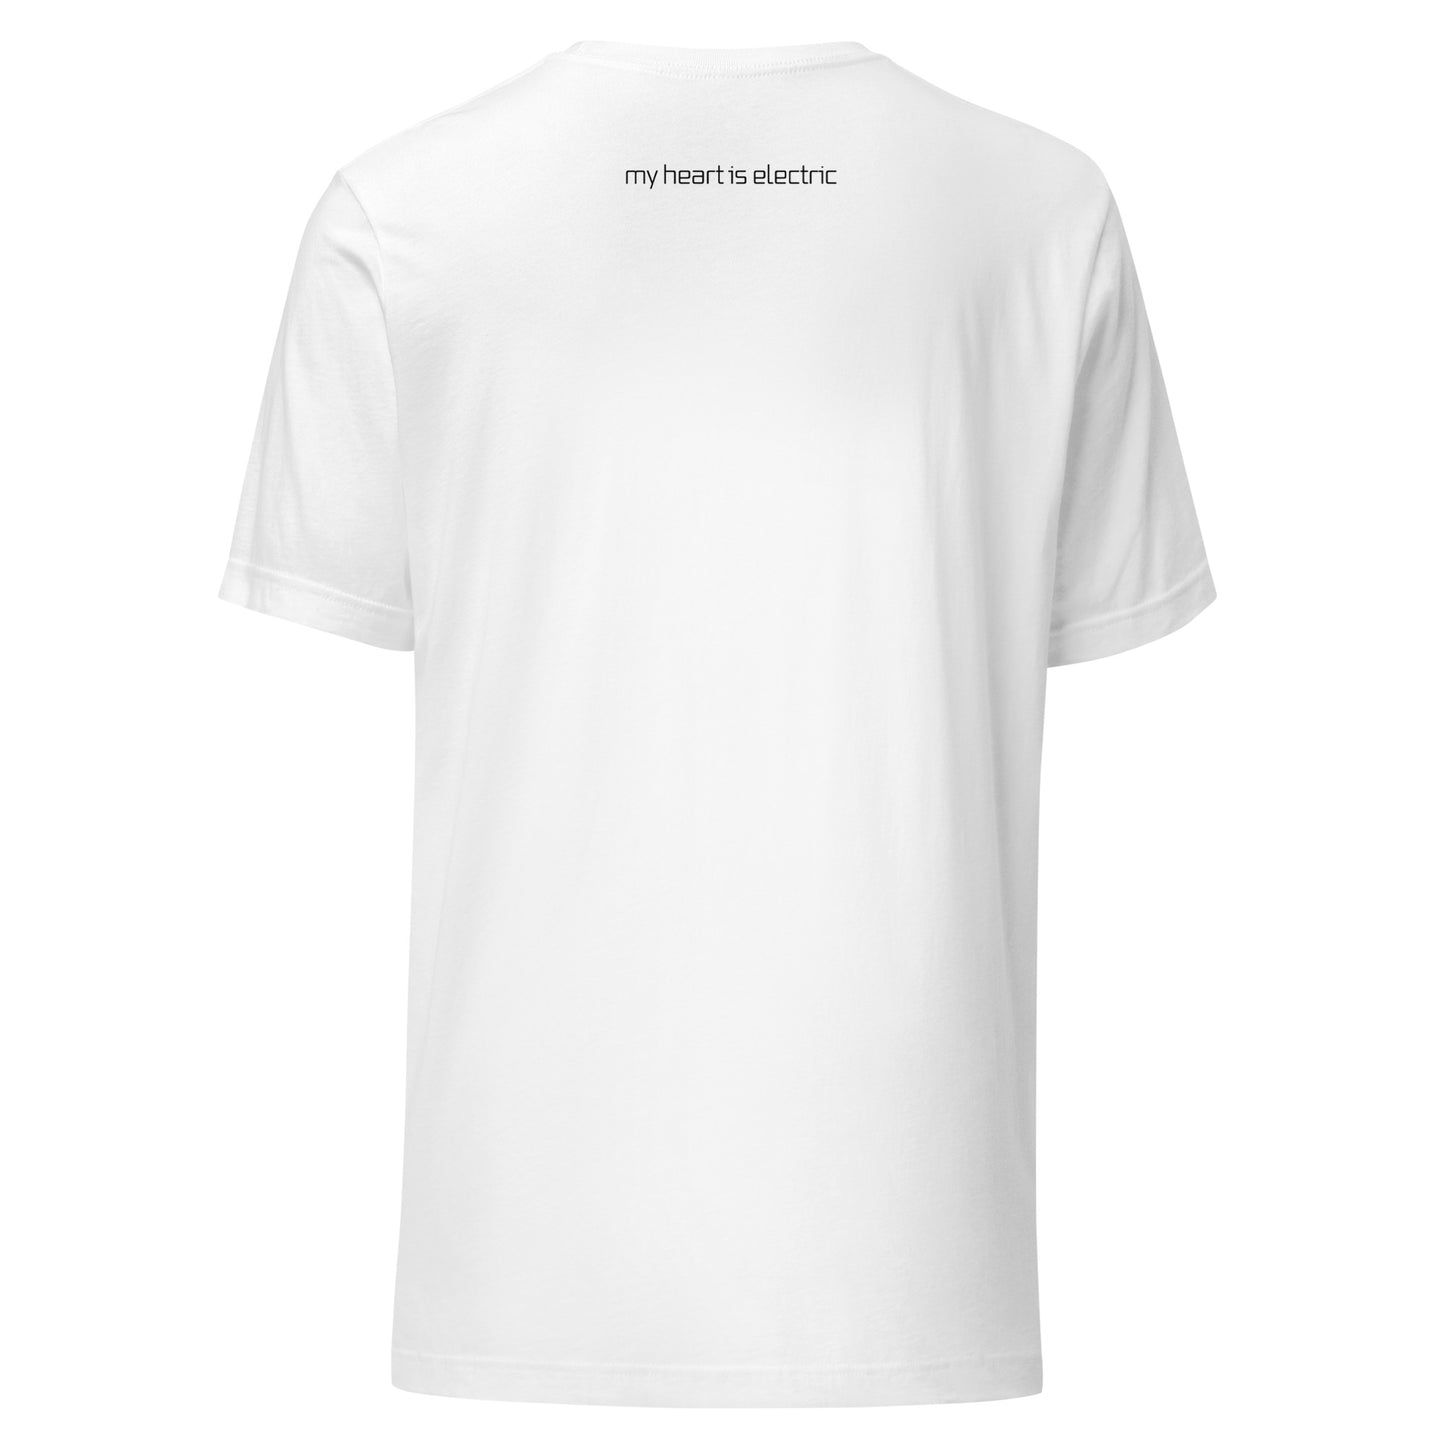 1984 : Limited Edition T-Shirt (White)